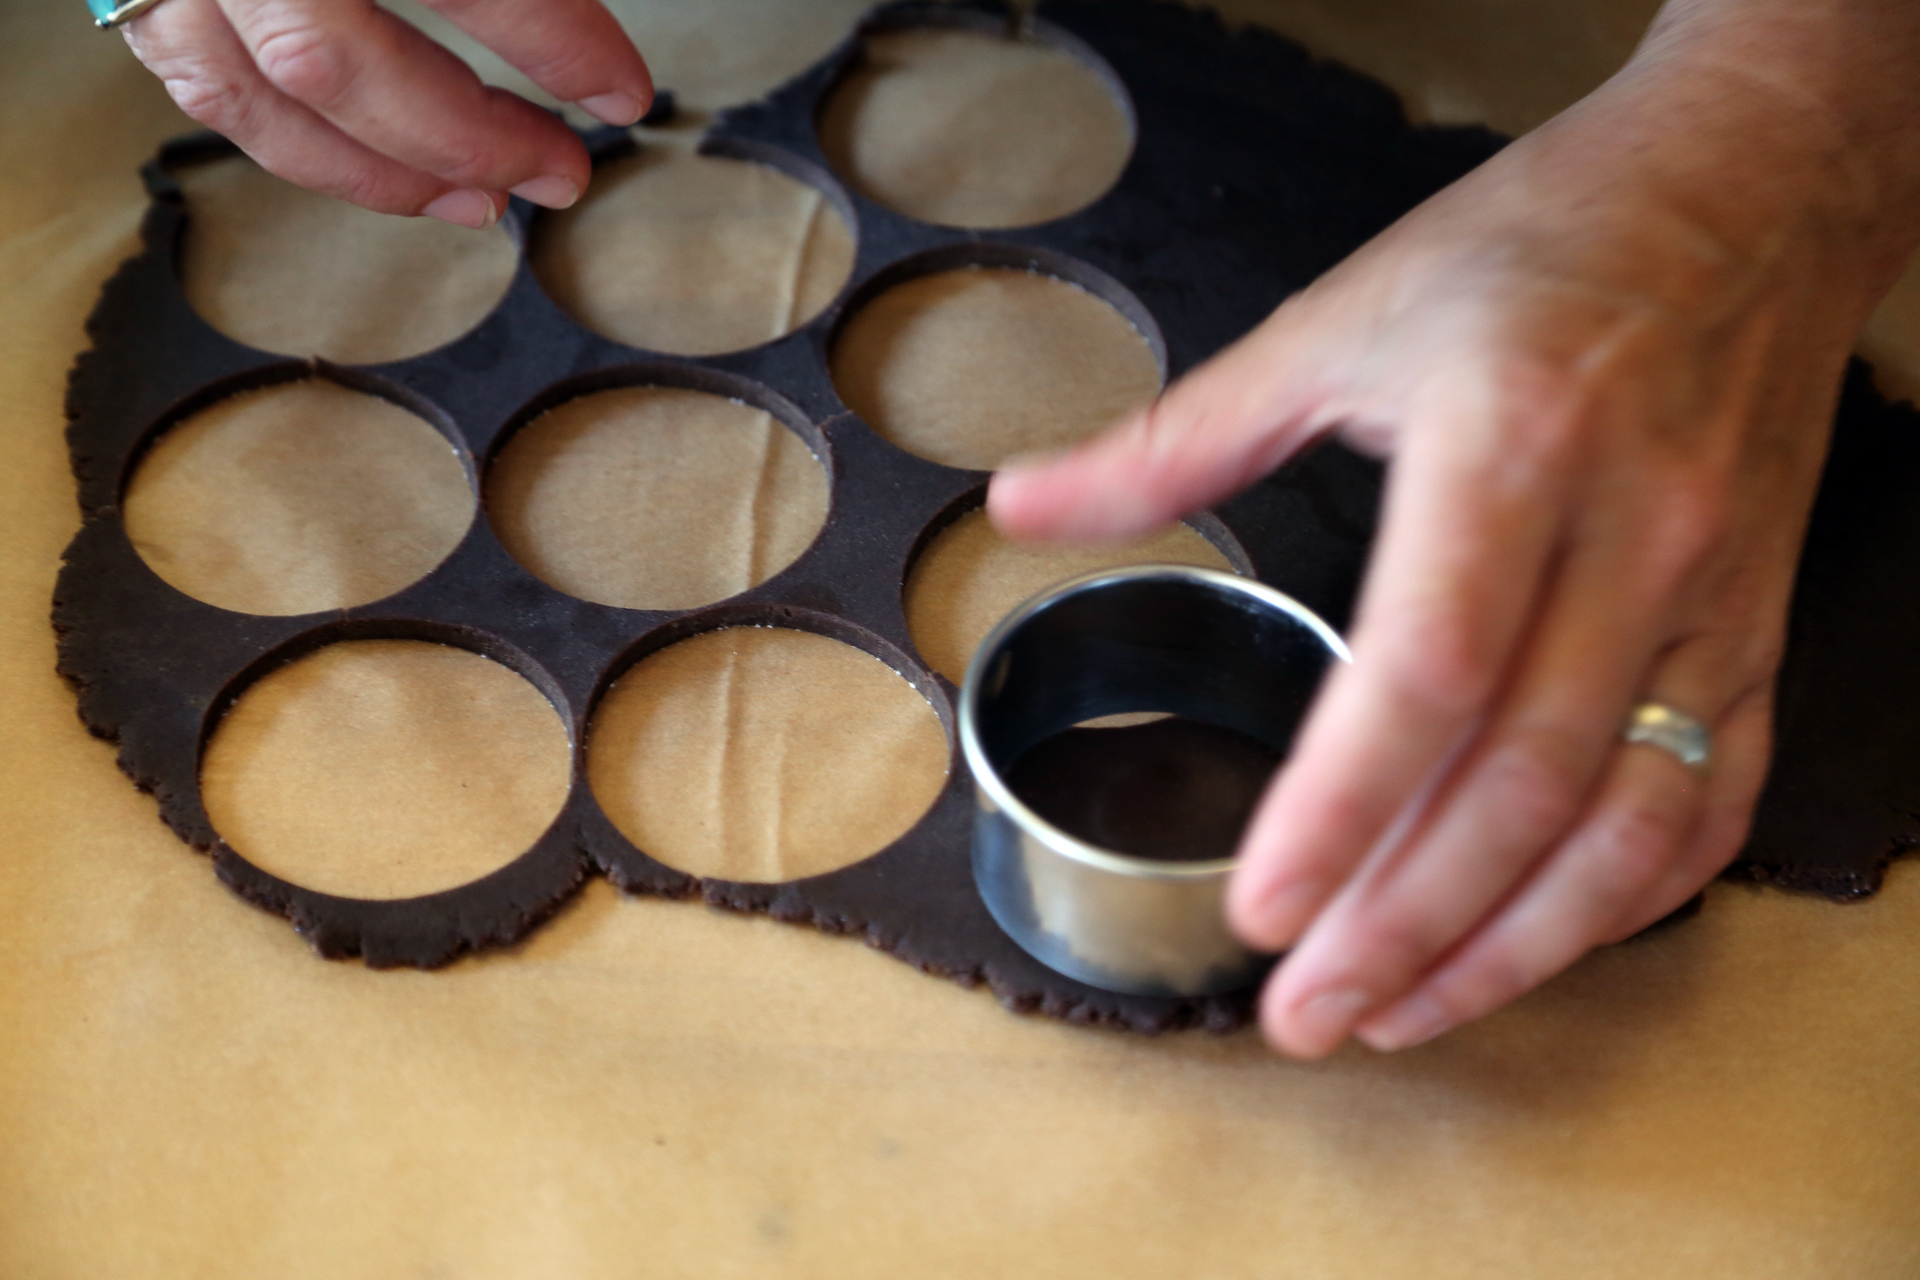 Using a round 2 1/4-inch cookie cutter, cut out as many rounds as possible.